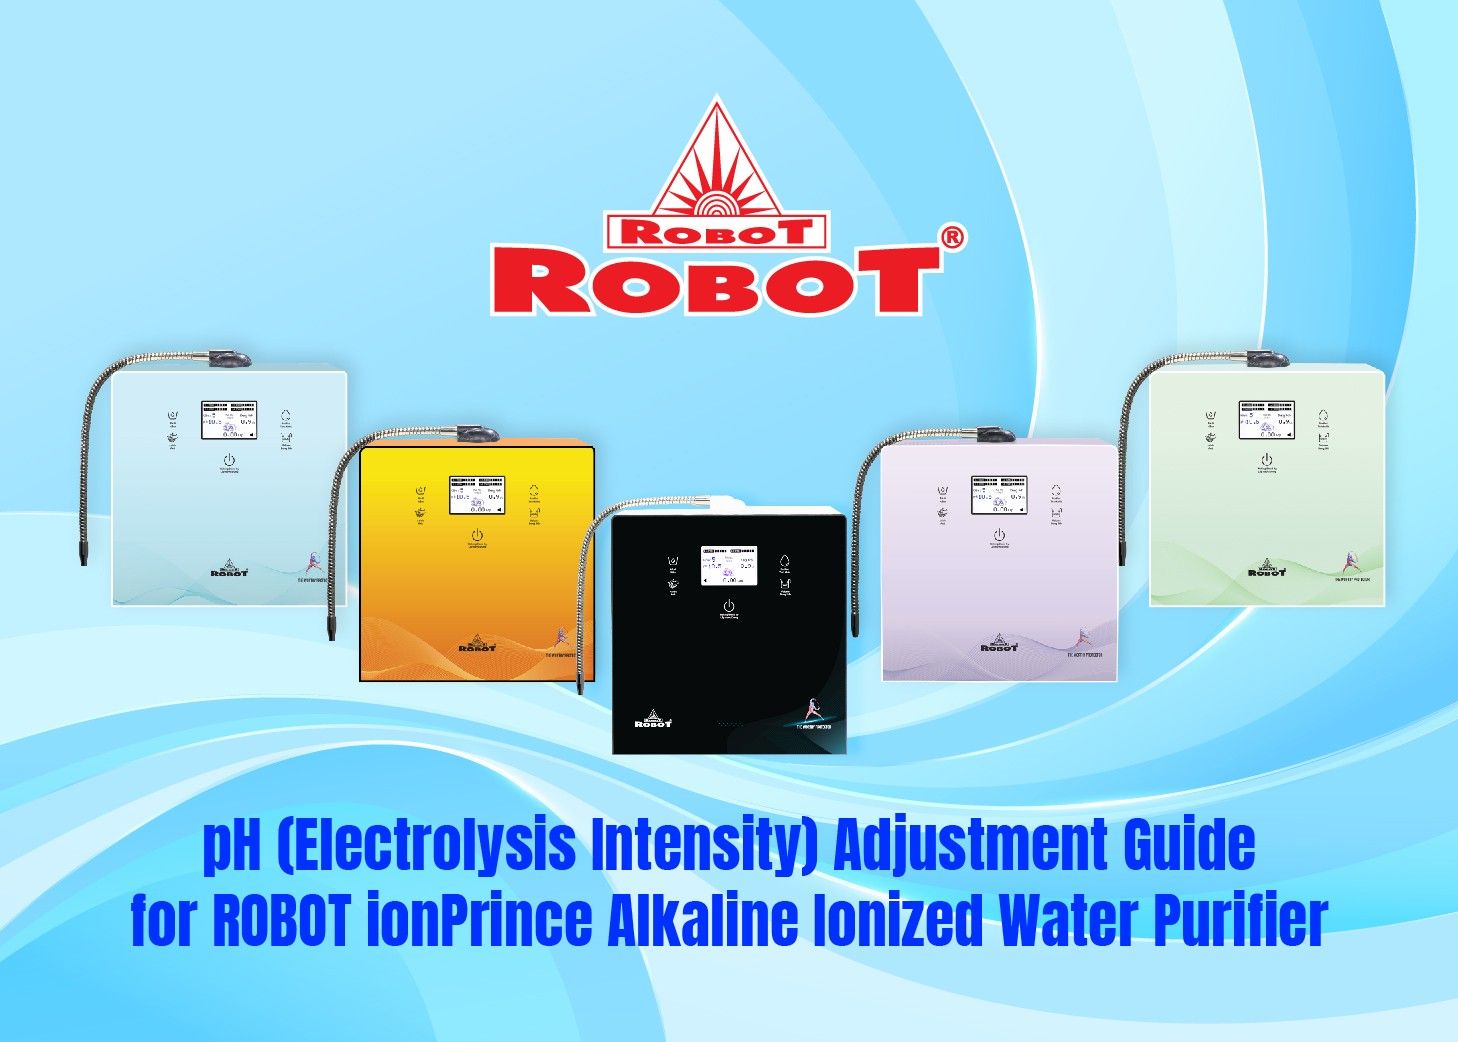 pH (Electrolysis Intensity) Adjustment Guide for ROBOT ionPrince Alkaline Ionized Water Purifier